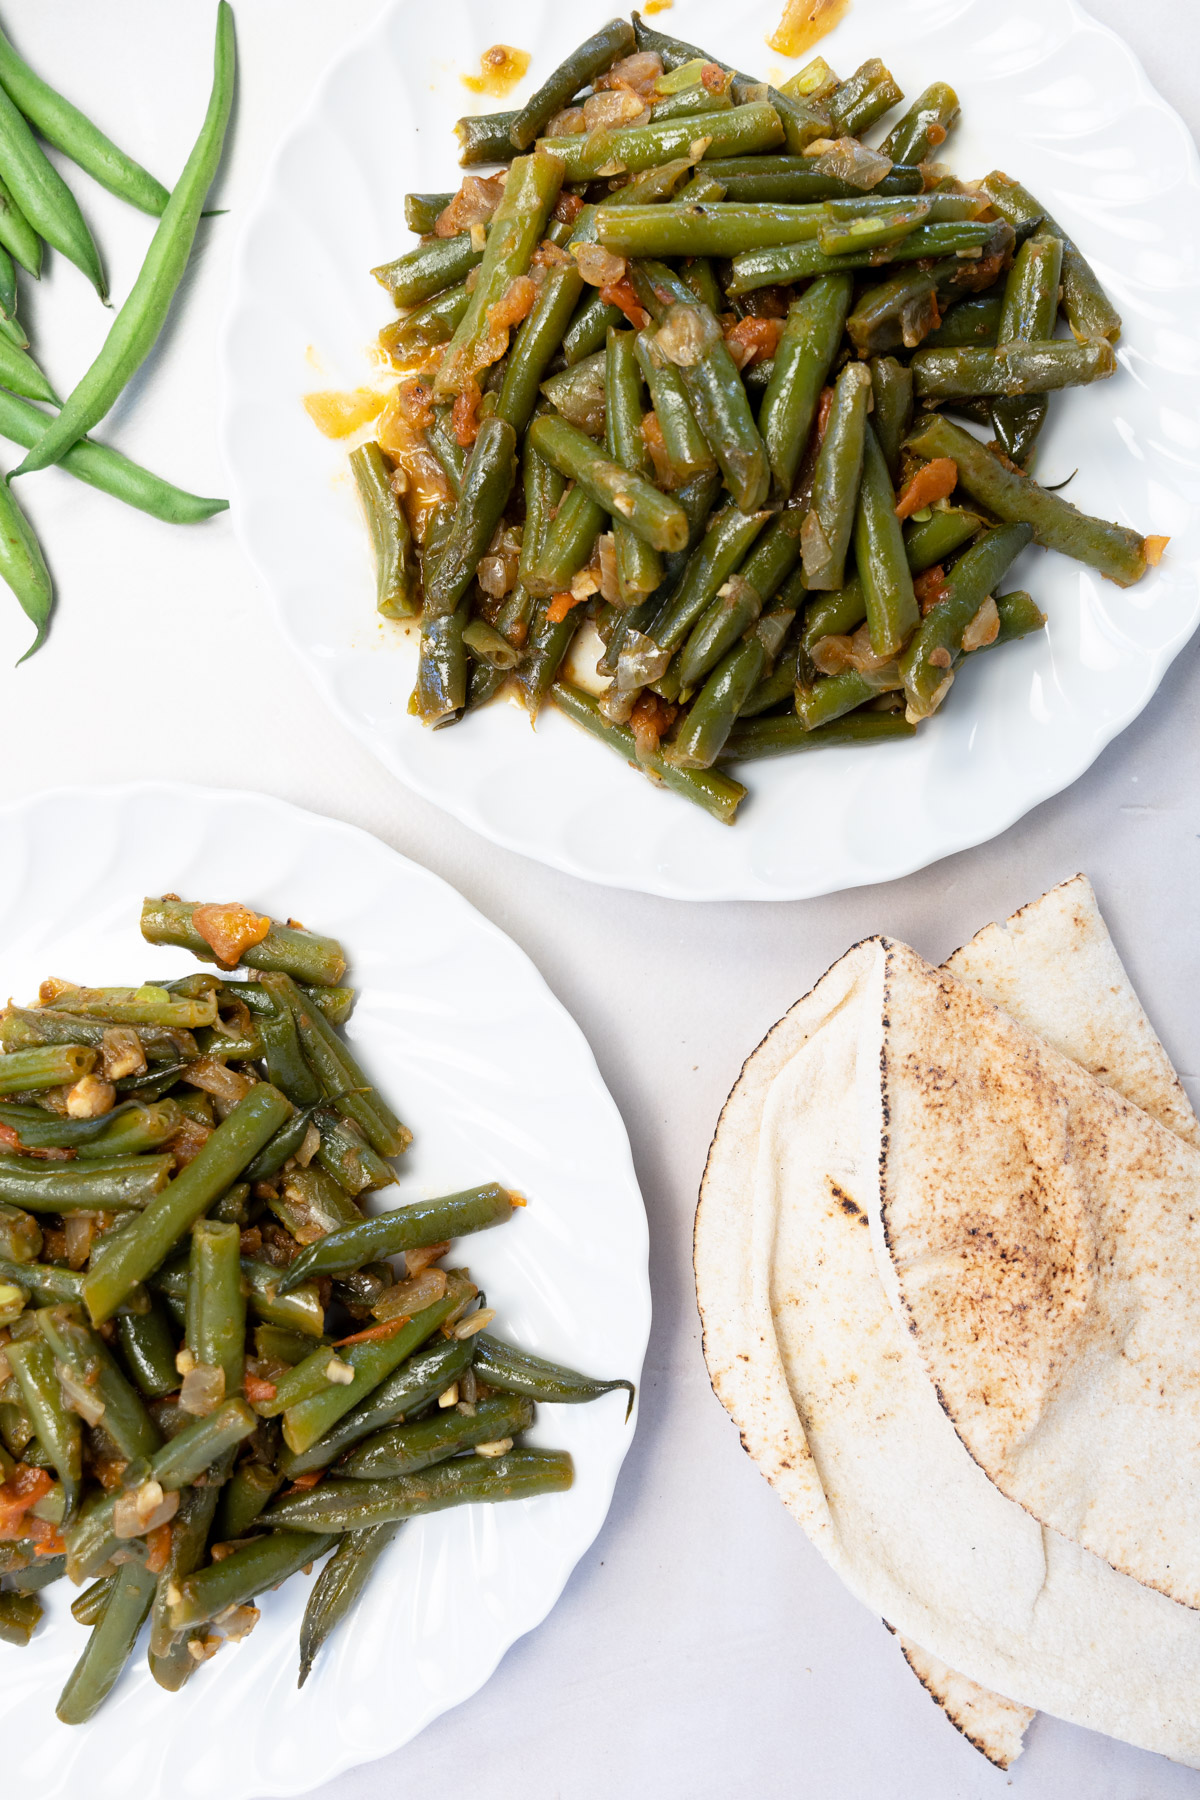 two white plates with braised green beans and a side of Lebanese bread